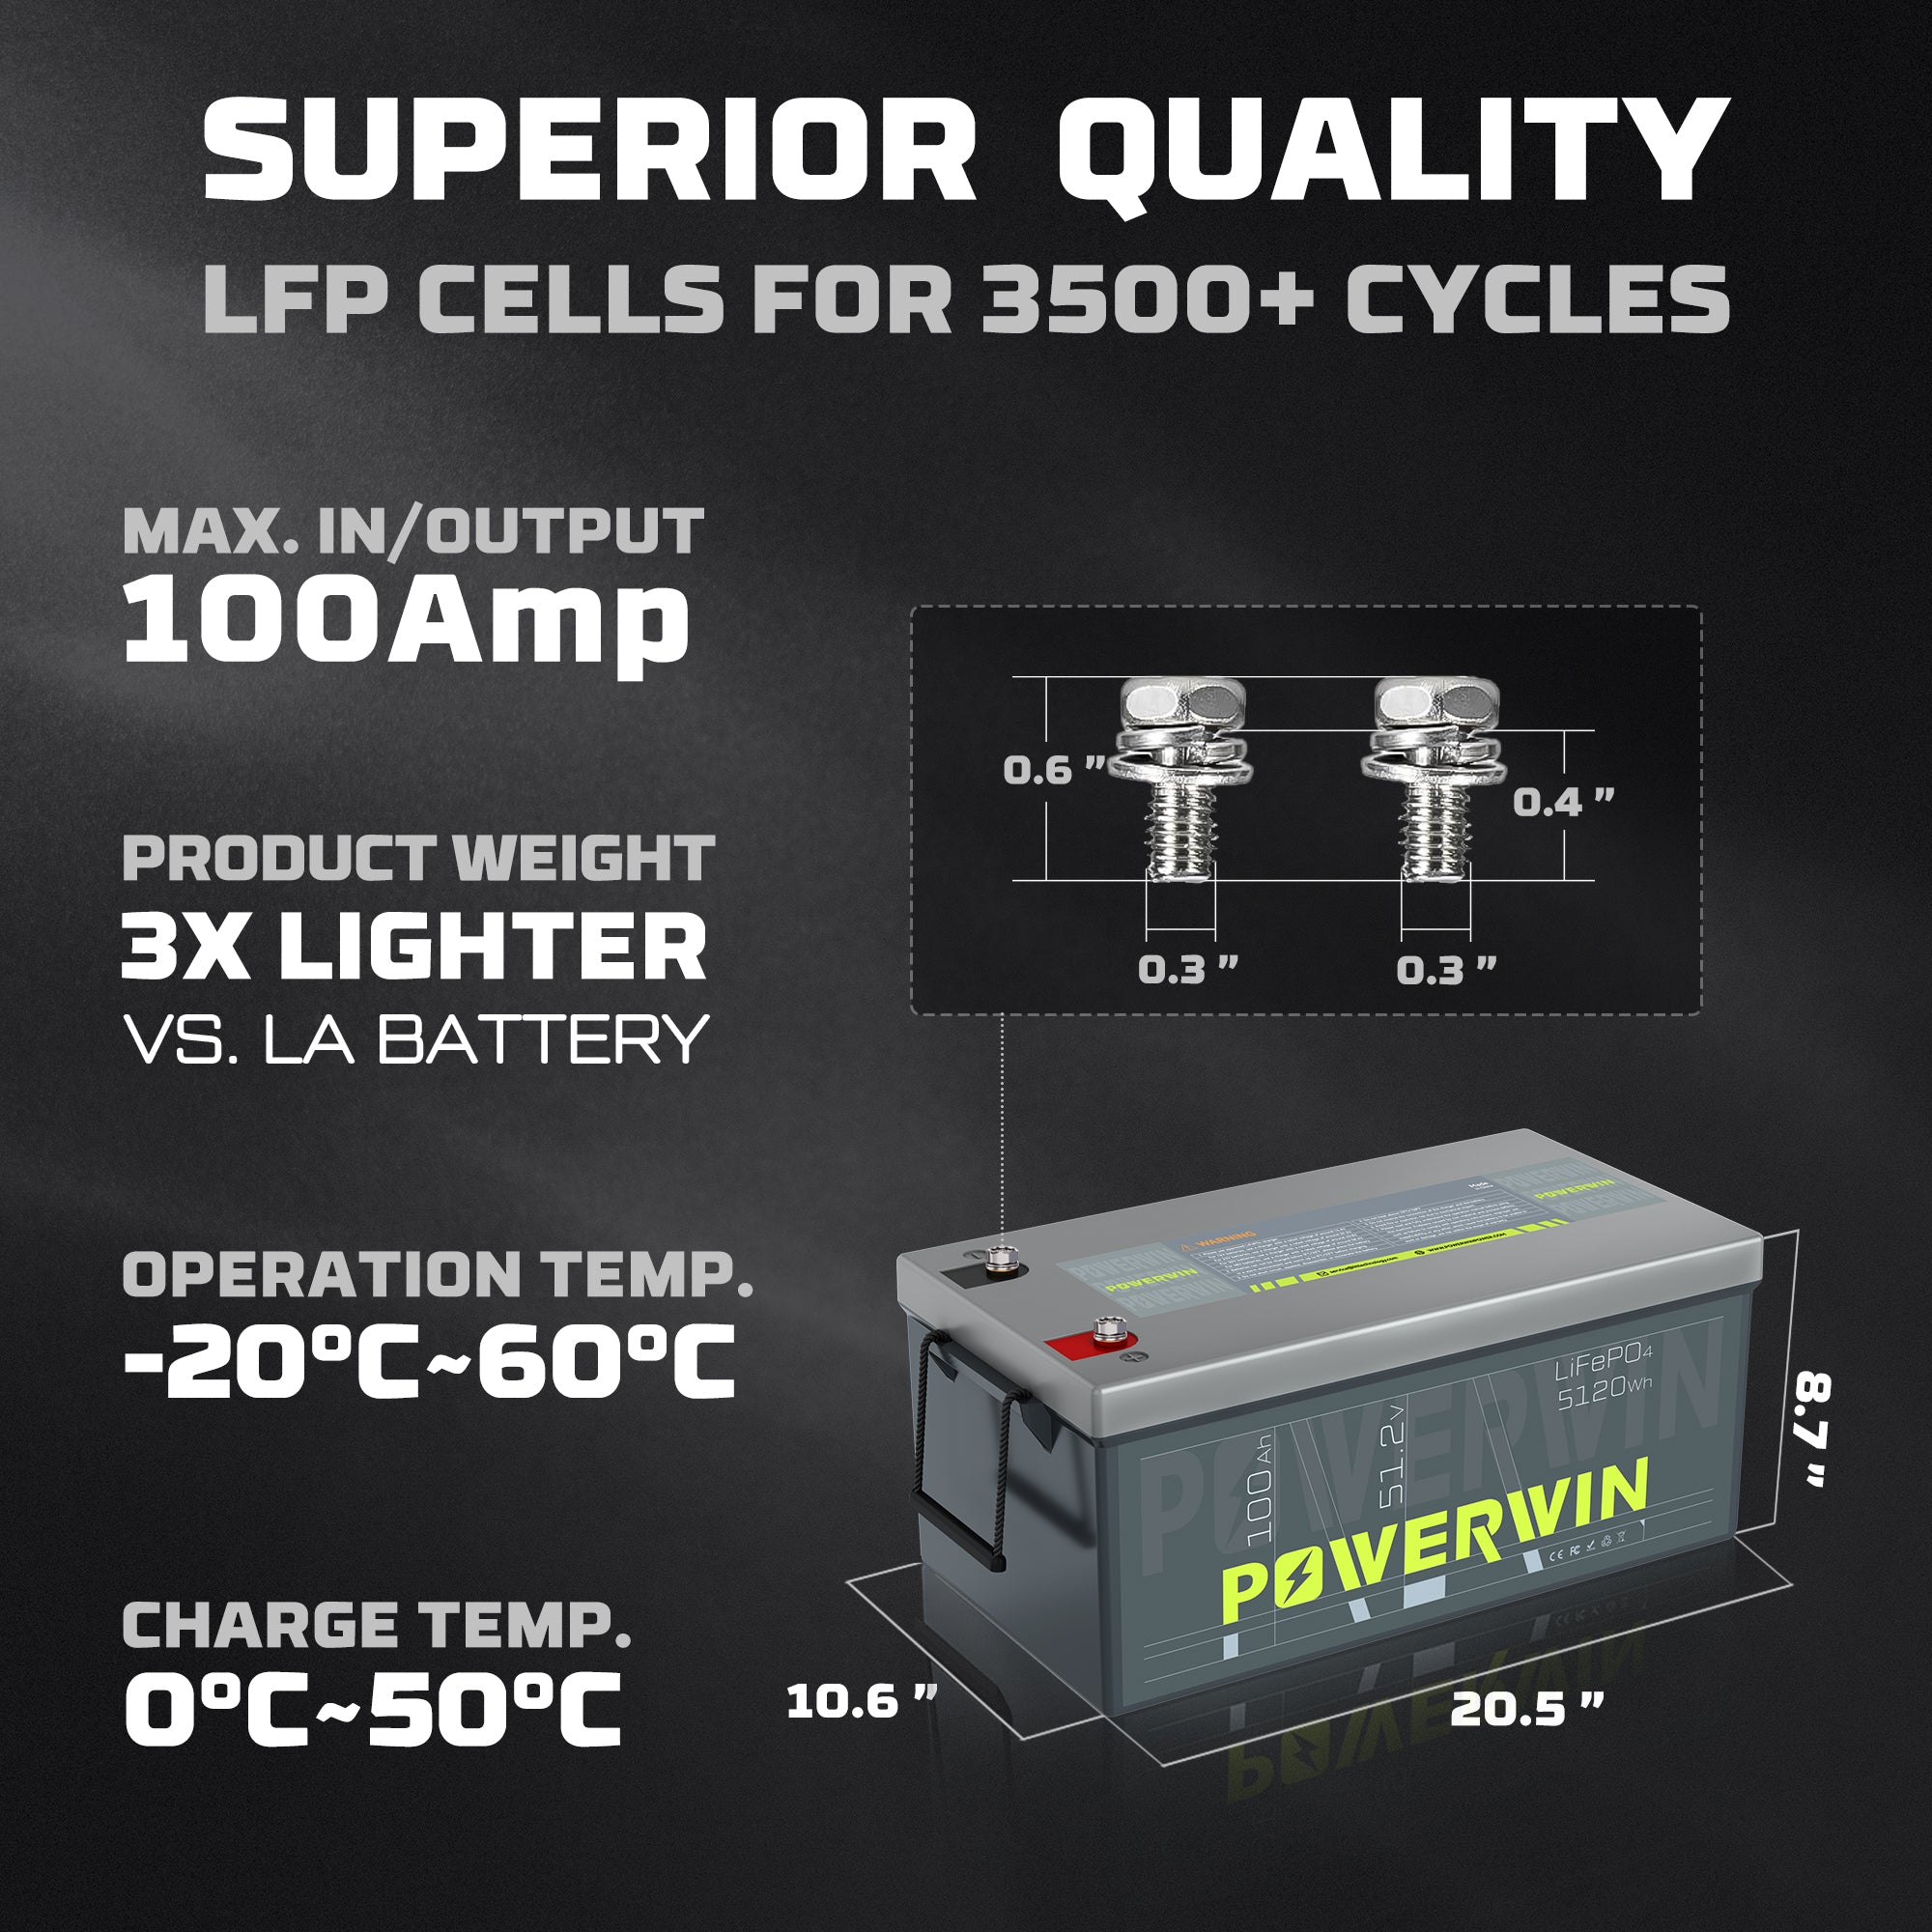 POWERWIN BT5120 48V 100Ah 5120Wh Lithium Battery 2 Pack 10240Wh